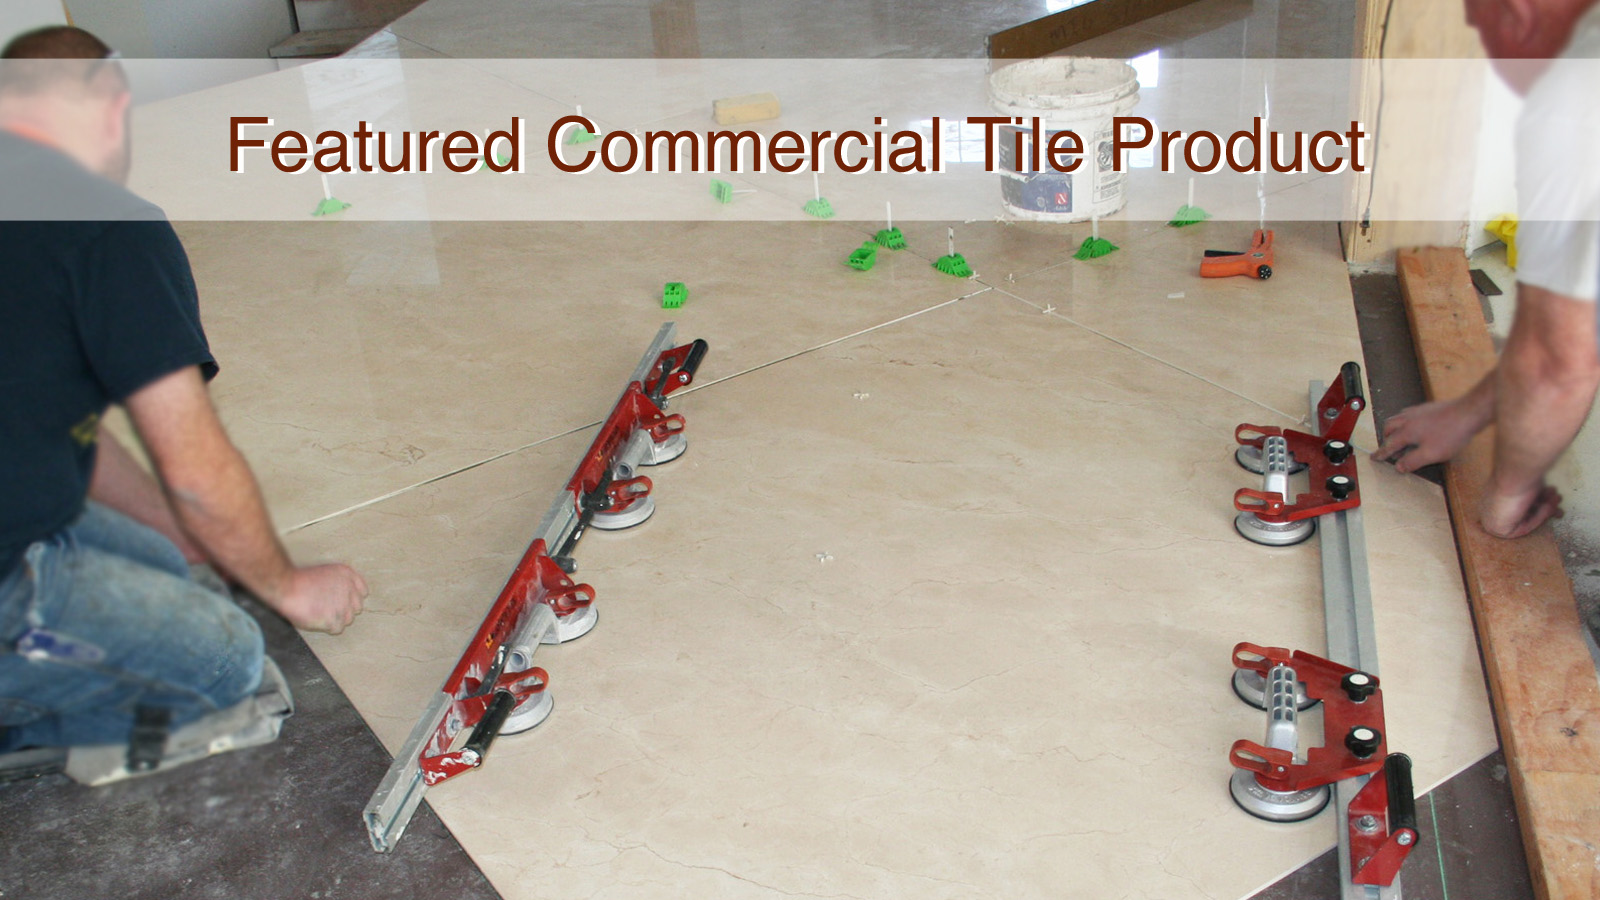 Featured Commercial Tile Product